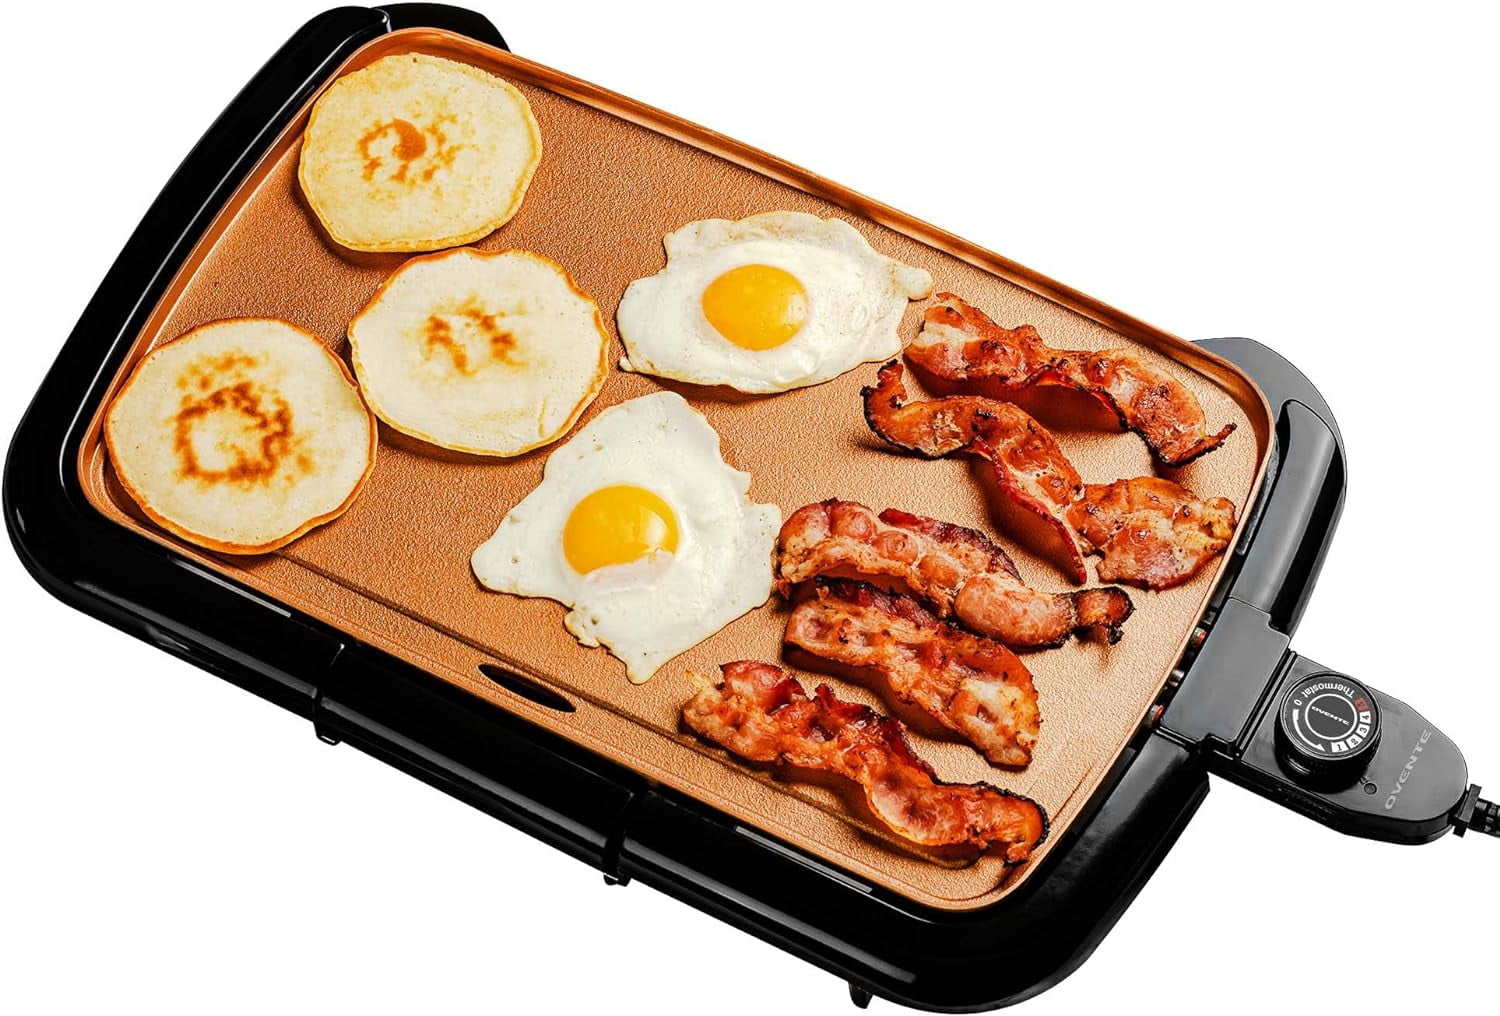 Dash 8” Express Electric Round Griddle (Assorted Colors) - Sam's Club